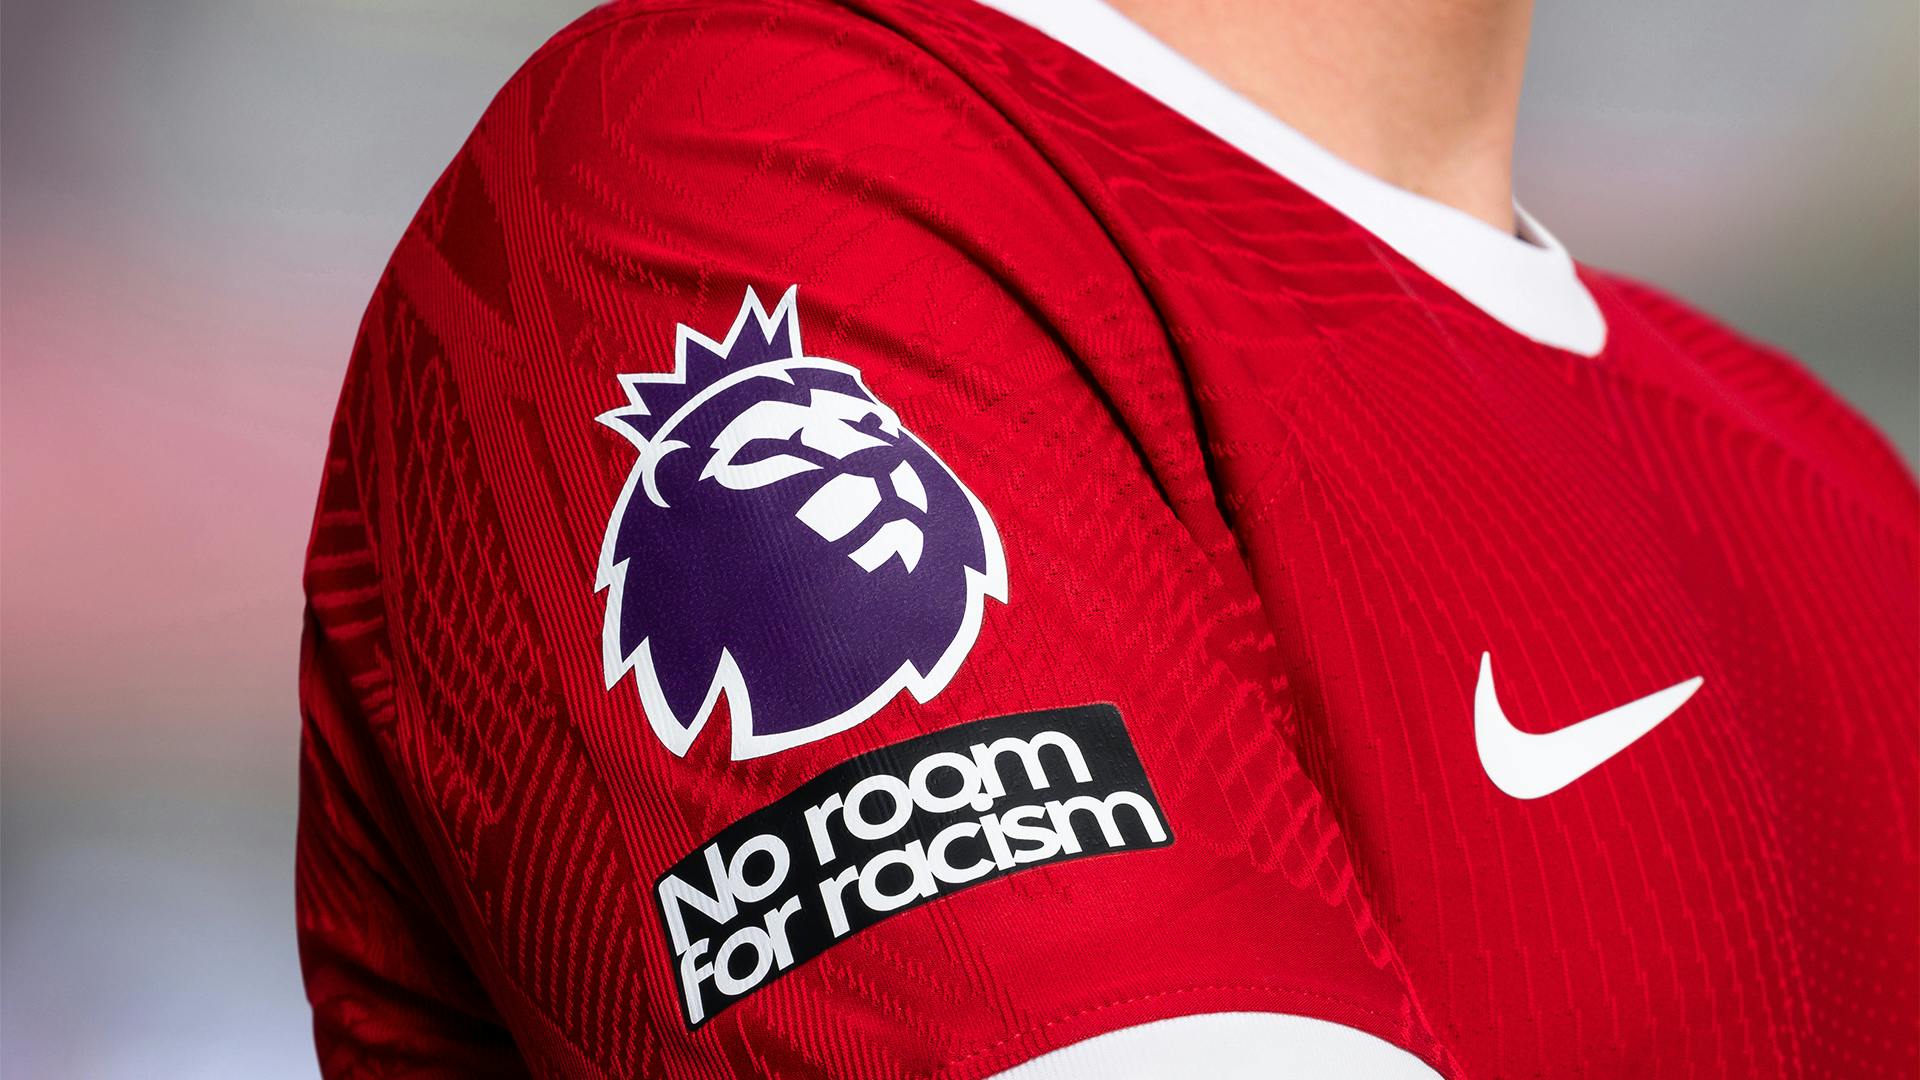 premier-league-rebrand-matchday-sleeve-patch